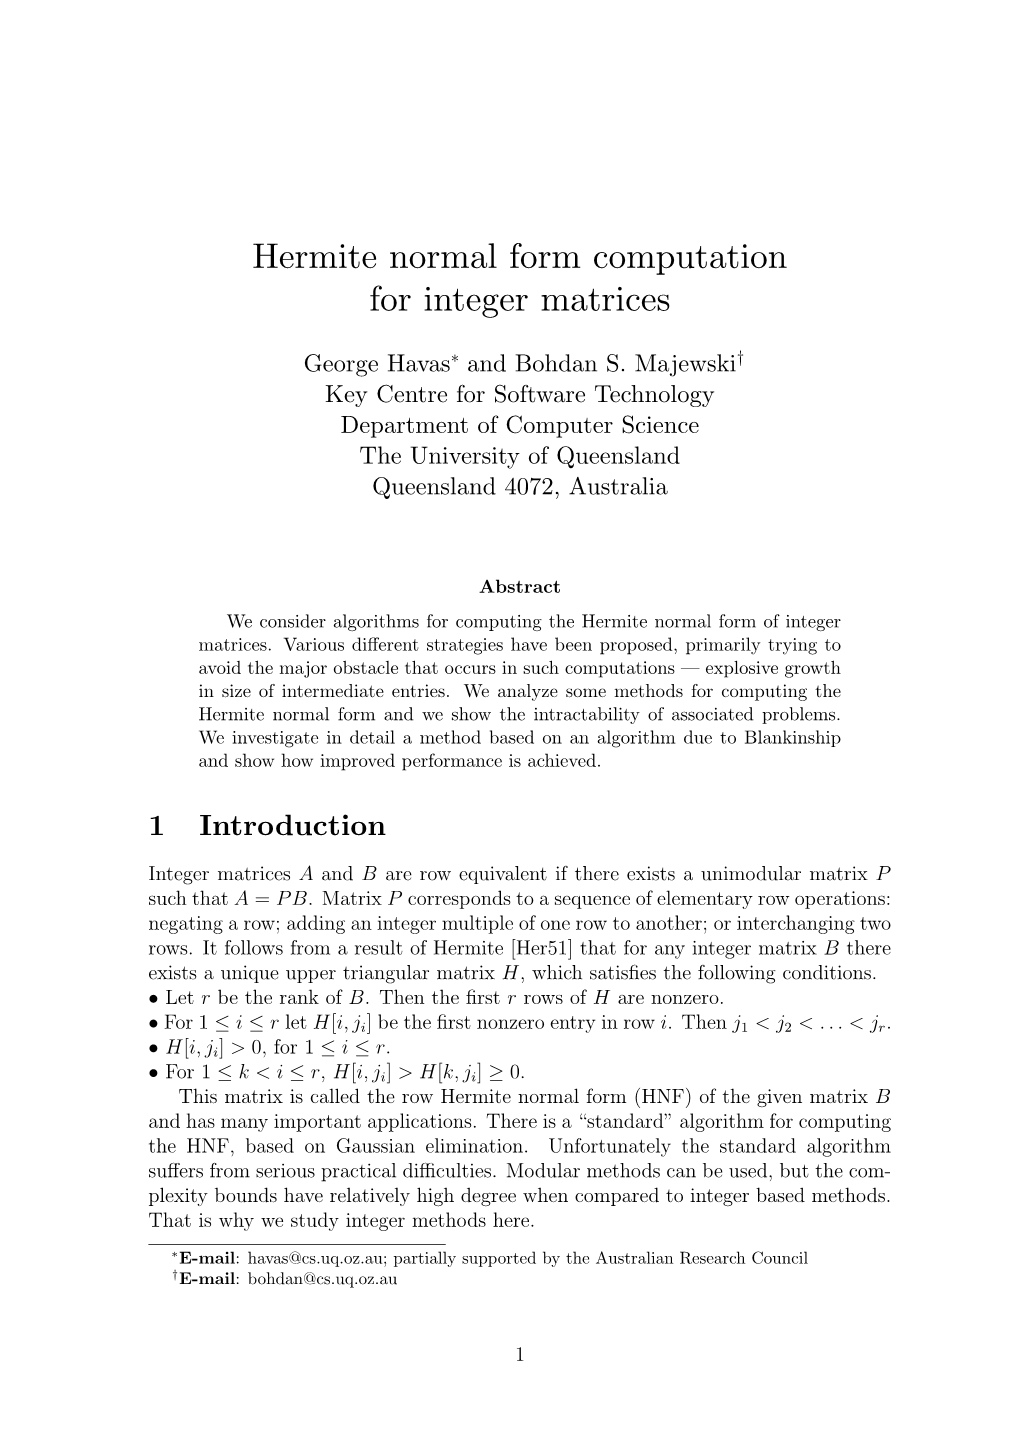 Hermite Normal Form Computation for Integer Matrices